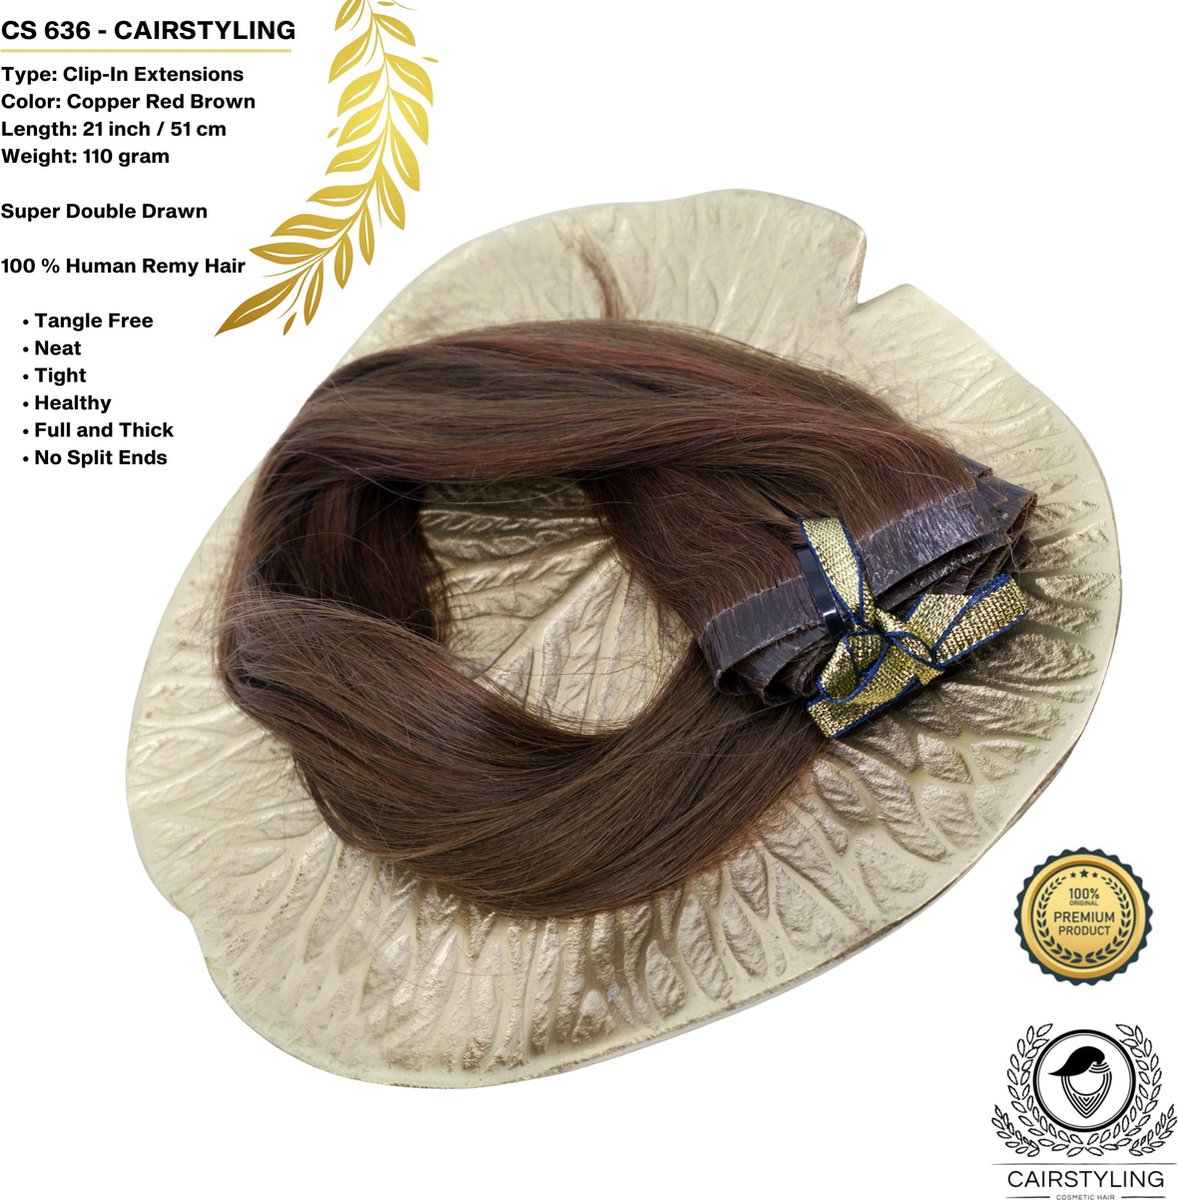 CAIRSTYLING Premium 100% Human Hair - CS636 INVISIBLE CLIP-IN - Super Double Remy Human Hair Extensions | 110 Gram | 51 CM (21 inch) | Haarverlenging | Best Quality Hair Long-term Use | 2022 Trending Seamless Invisible Laces | Copper Red Piano